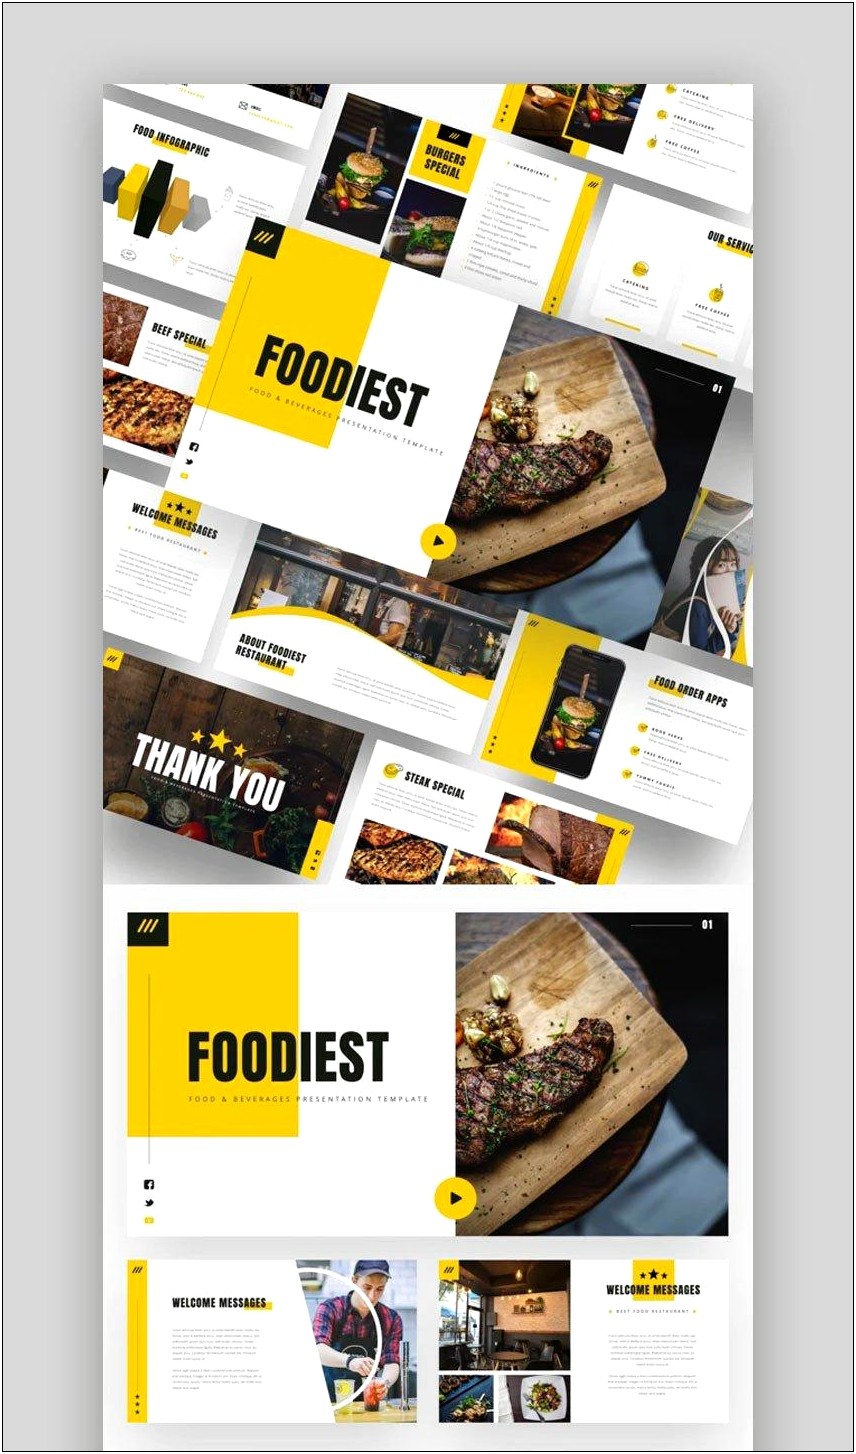 Food Menu Presentation After Effects Template Free